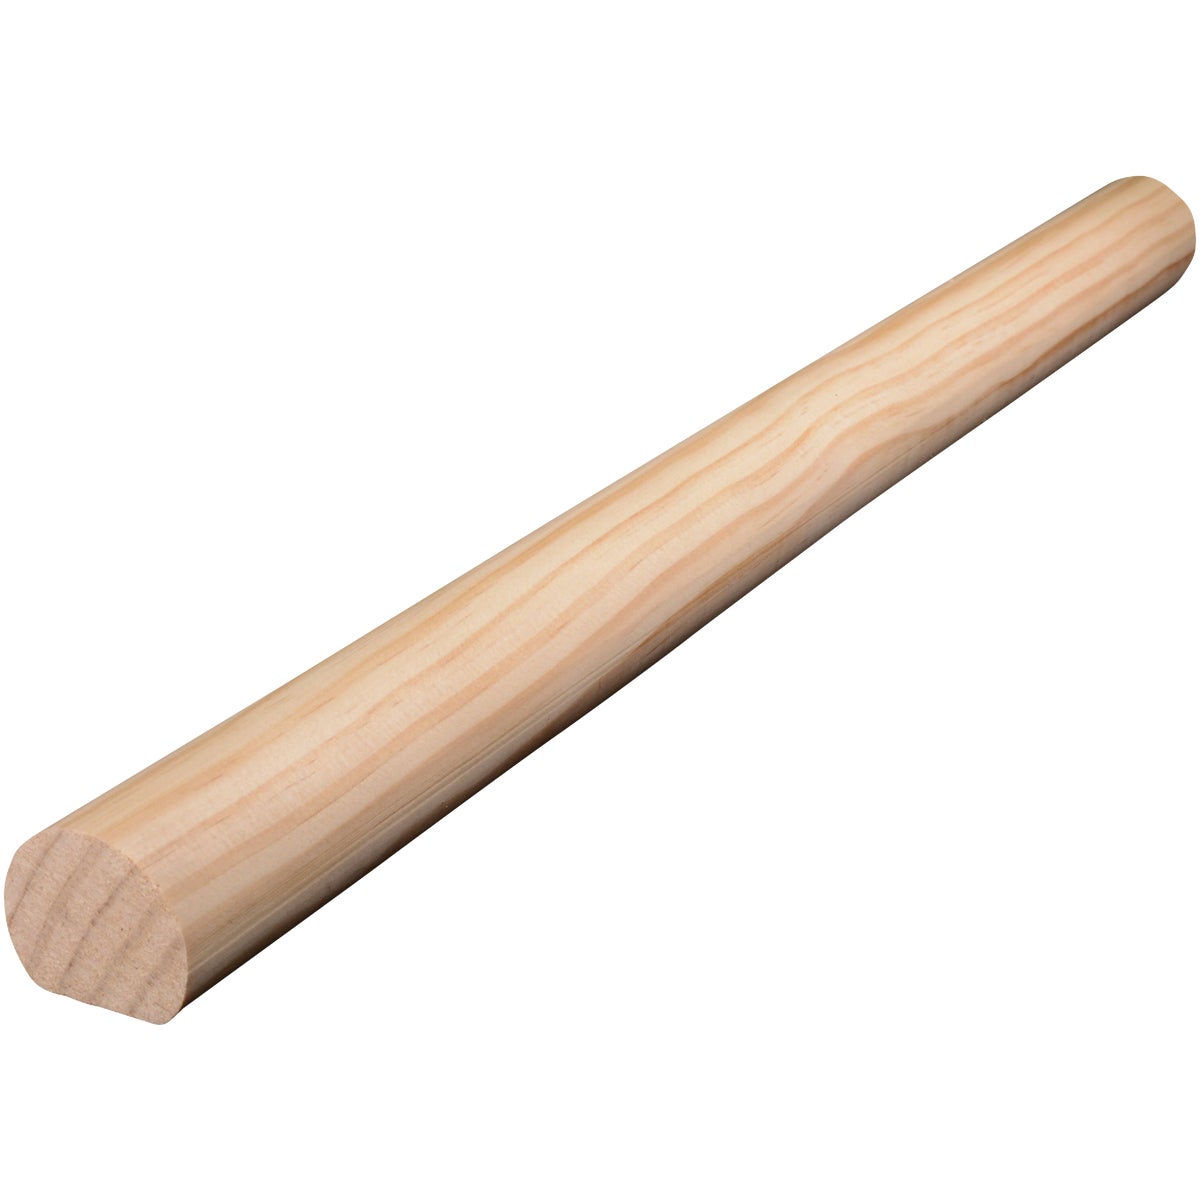 Alexandria Moulding 1-1/2 In. x 1-11/16 In. x 8 Ft. Solid Pine Handrail